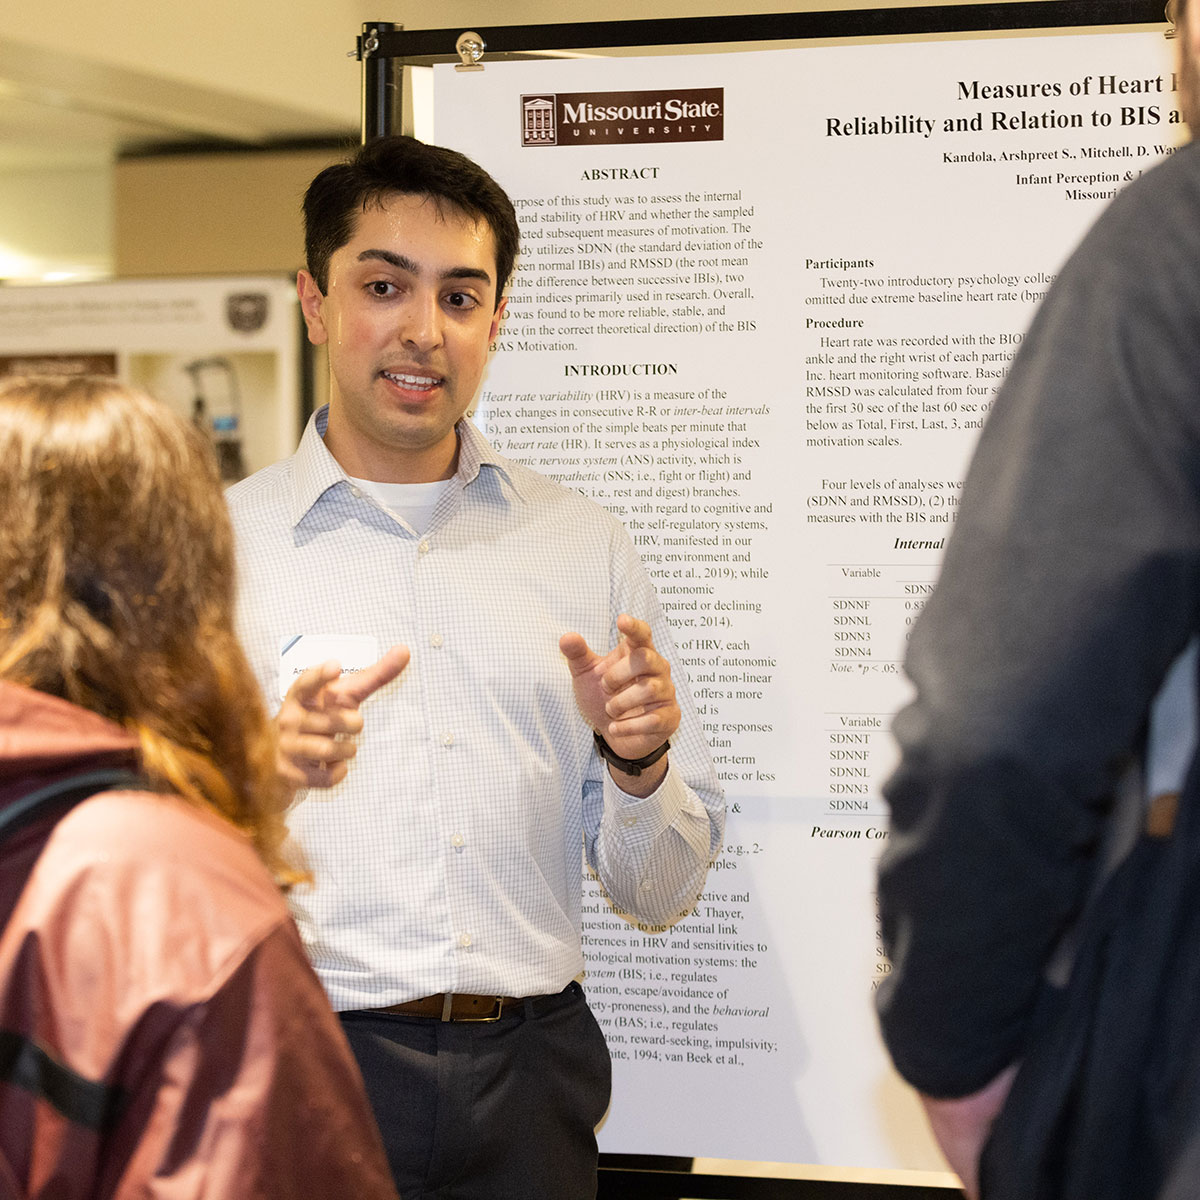 A graduate student shares his poster presentation with two listeners at a research symposium